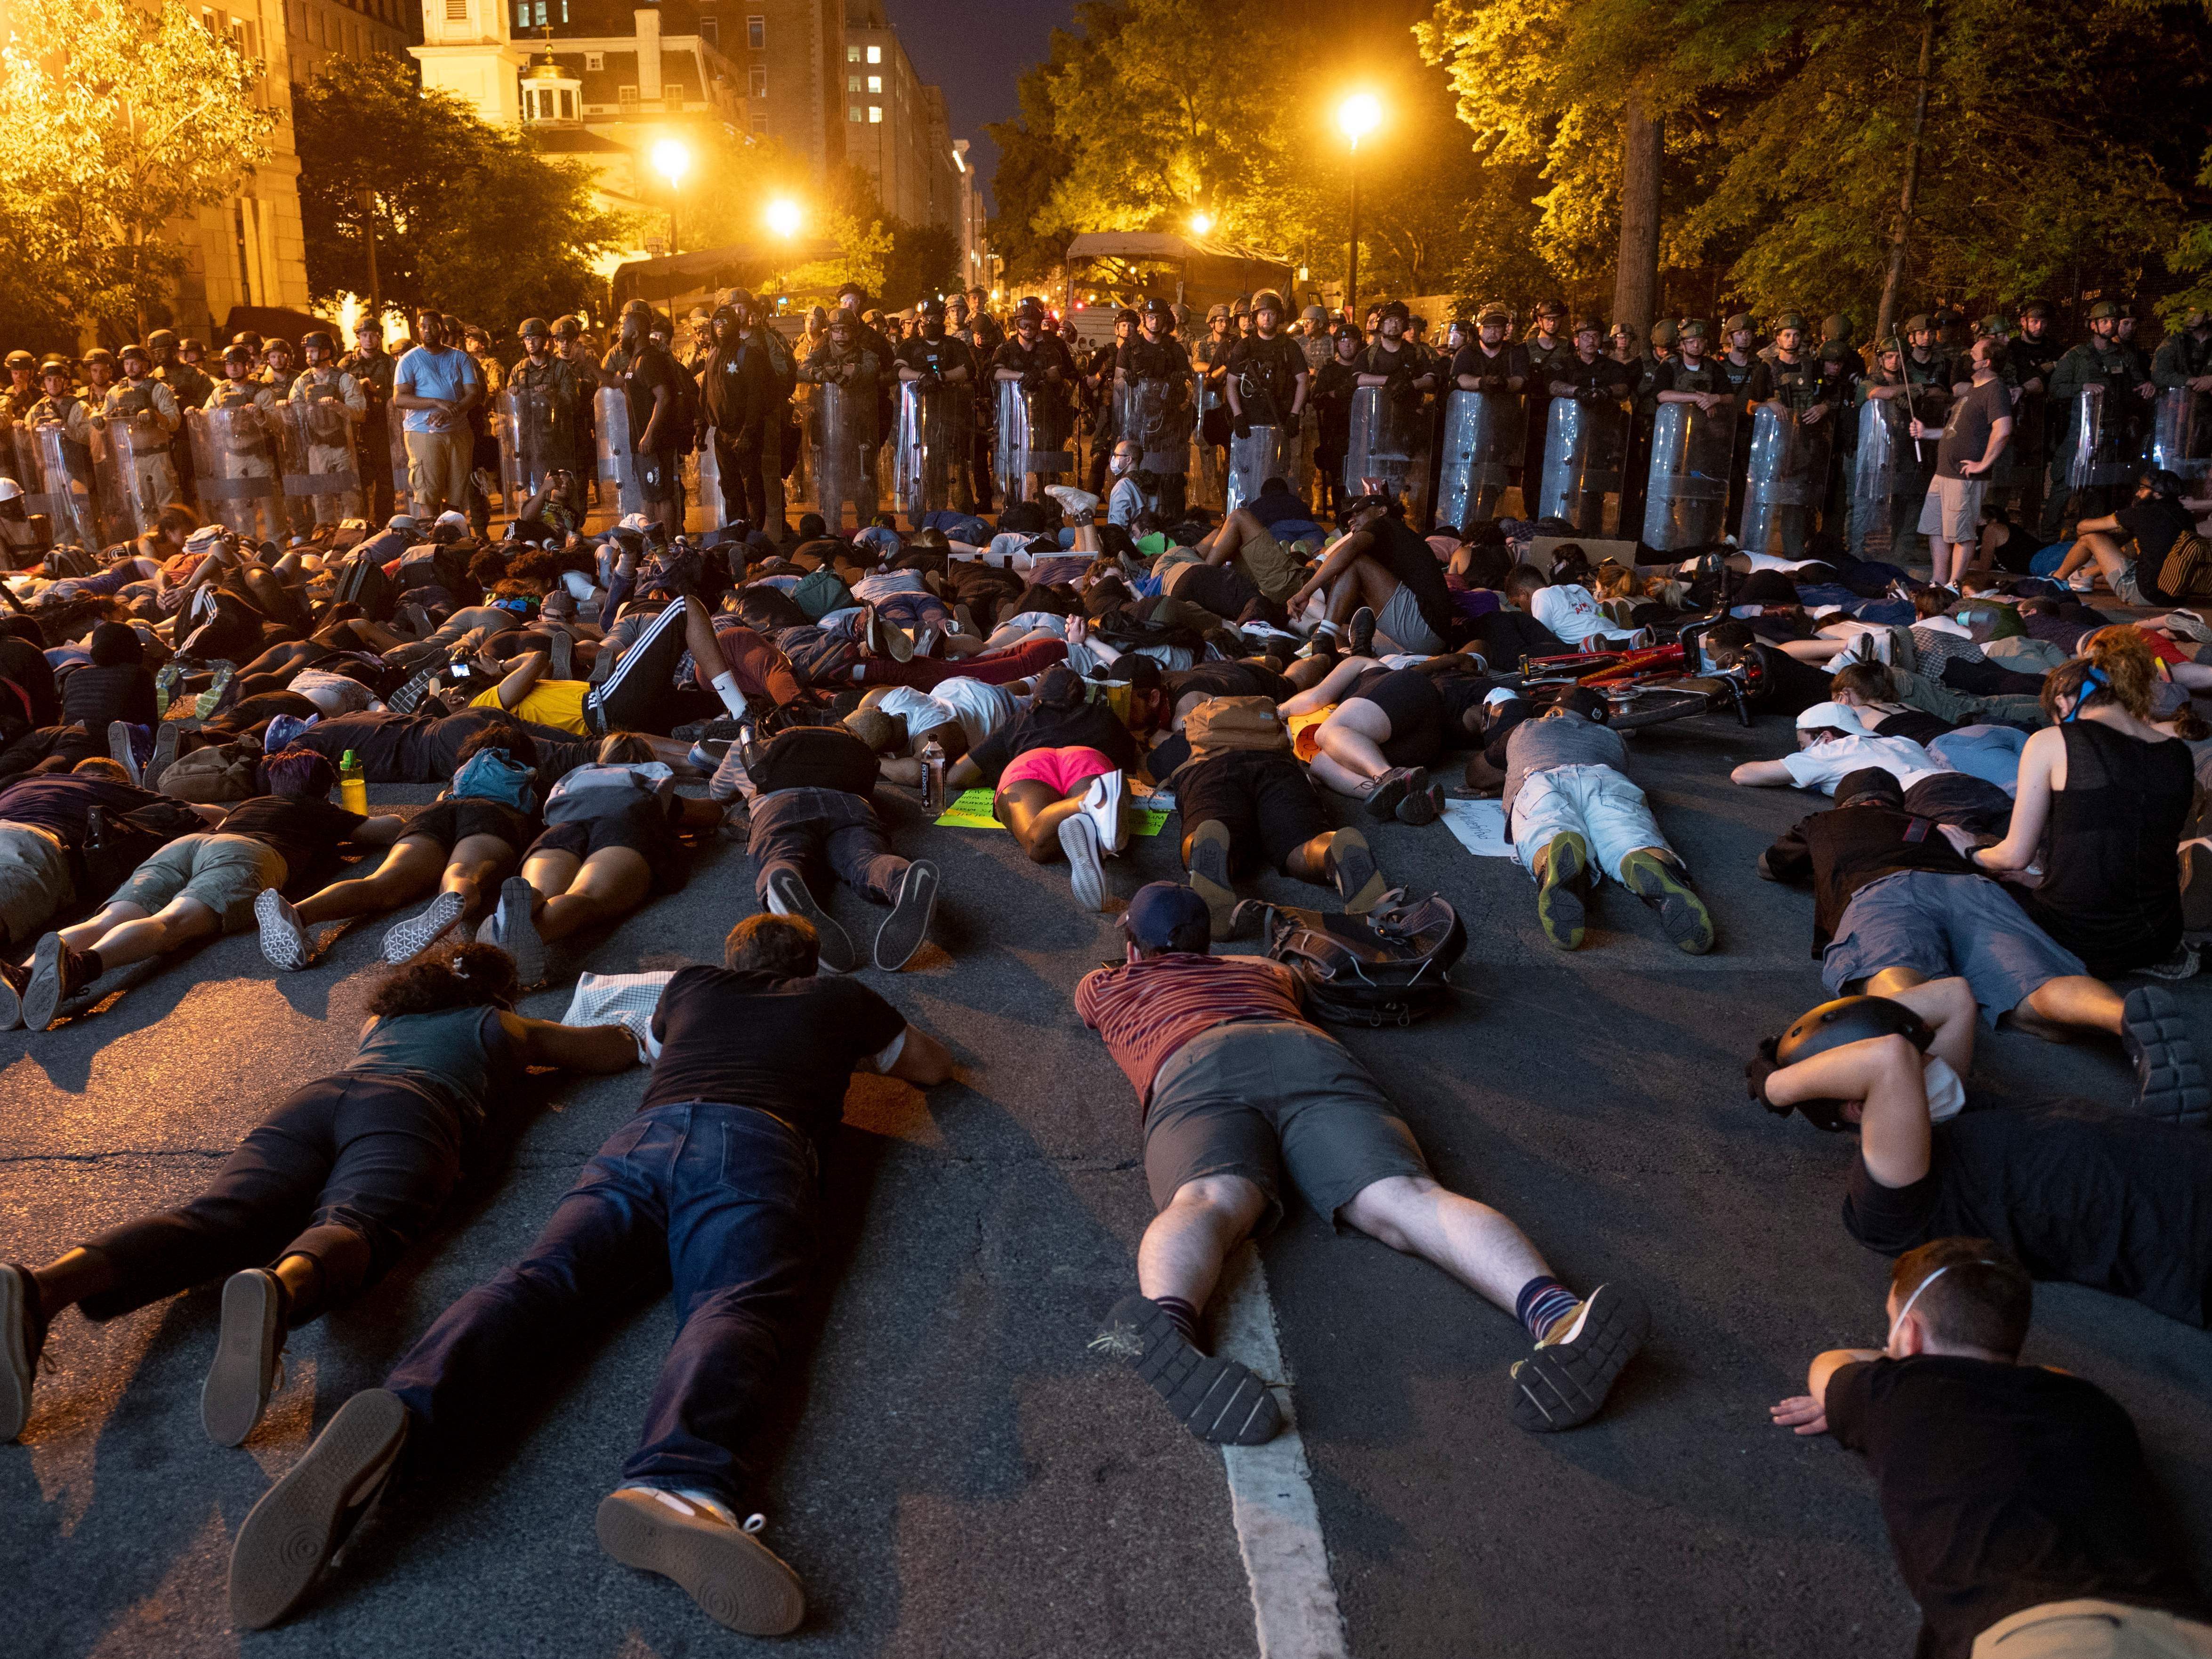 Demonstrators lay on the ground facing a police line in front of the White House during protests in Washington, D.C.